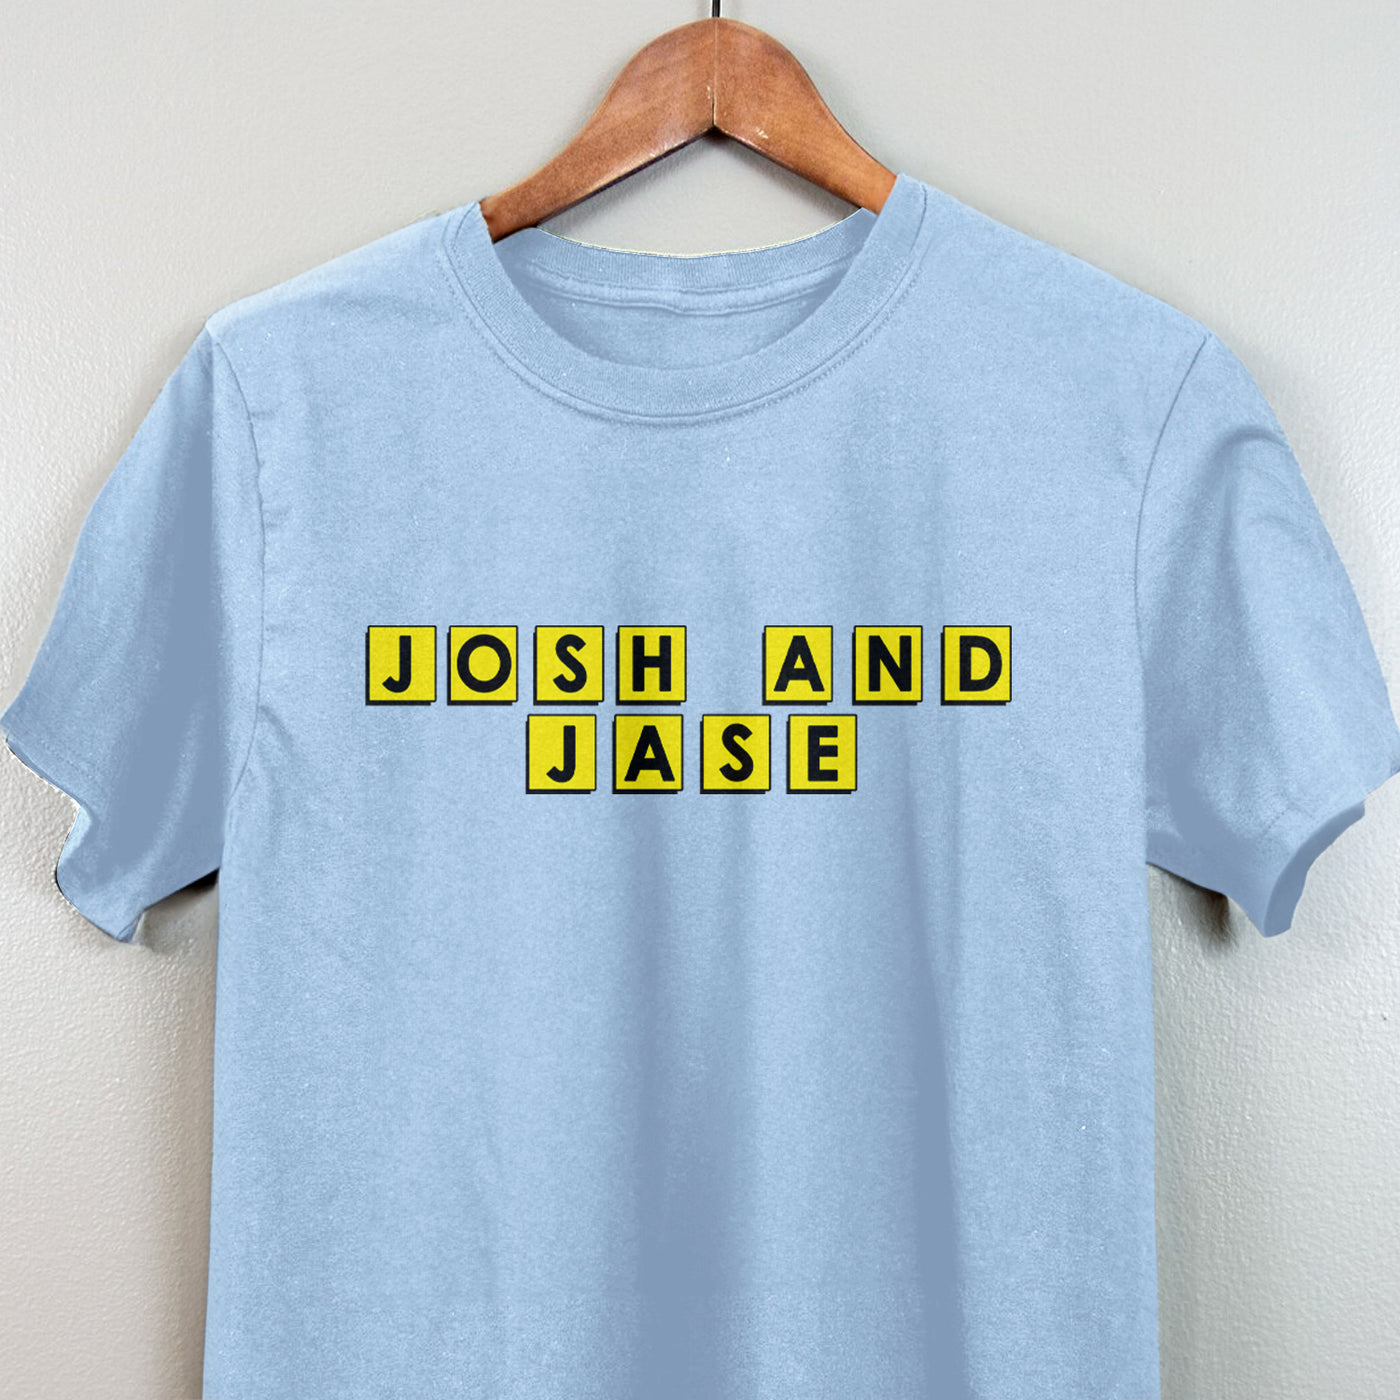 Josh and Jase Waffle House Men's Apparel